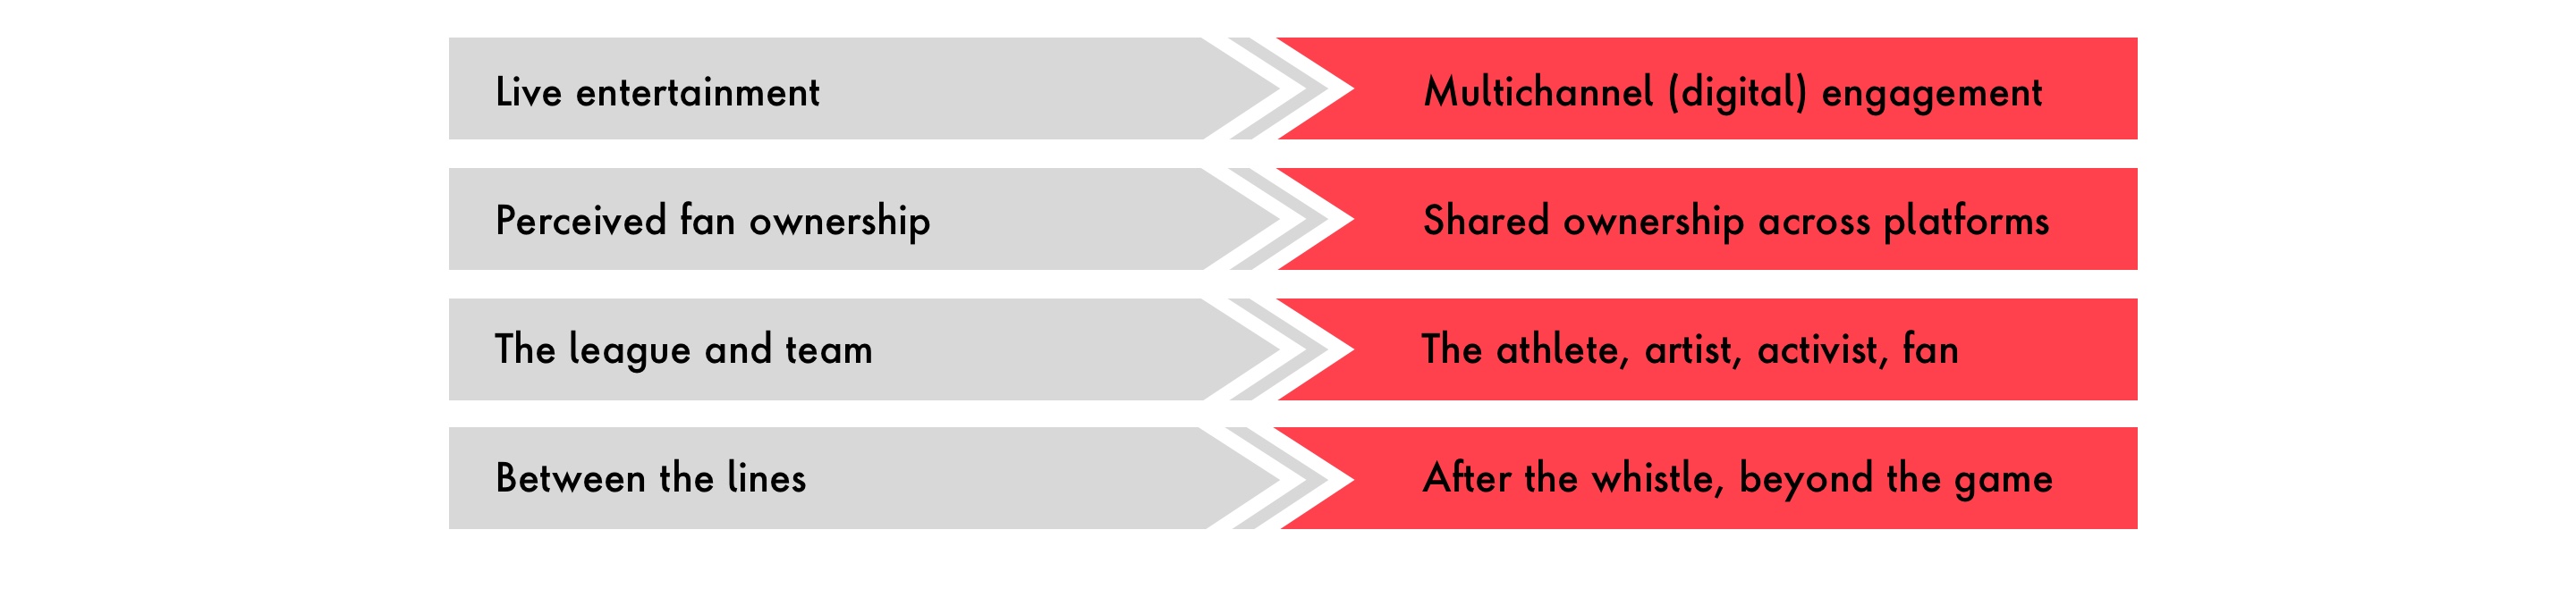 Graphic depicting four ways the Sports industry is evolving: first, from live entertainment to multichannel digital; second, from perceived fan ownership to shared ownership across platforms; third, from focusing on the league and team to focusing on the athletes, activists, and fans; and fourth, from game-day activities to fan interactions that take place in between games and after the whistle. 